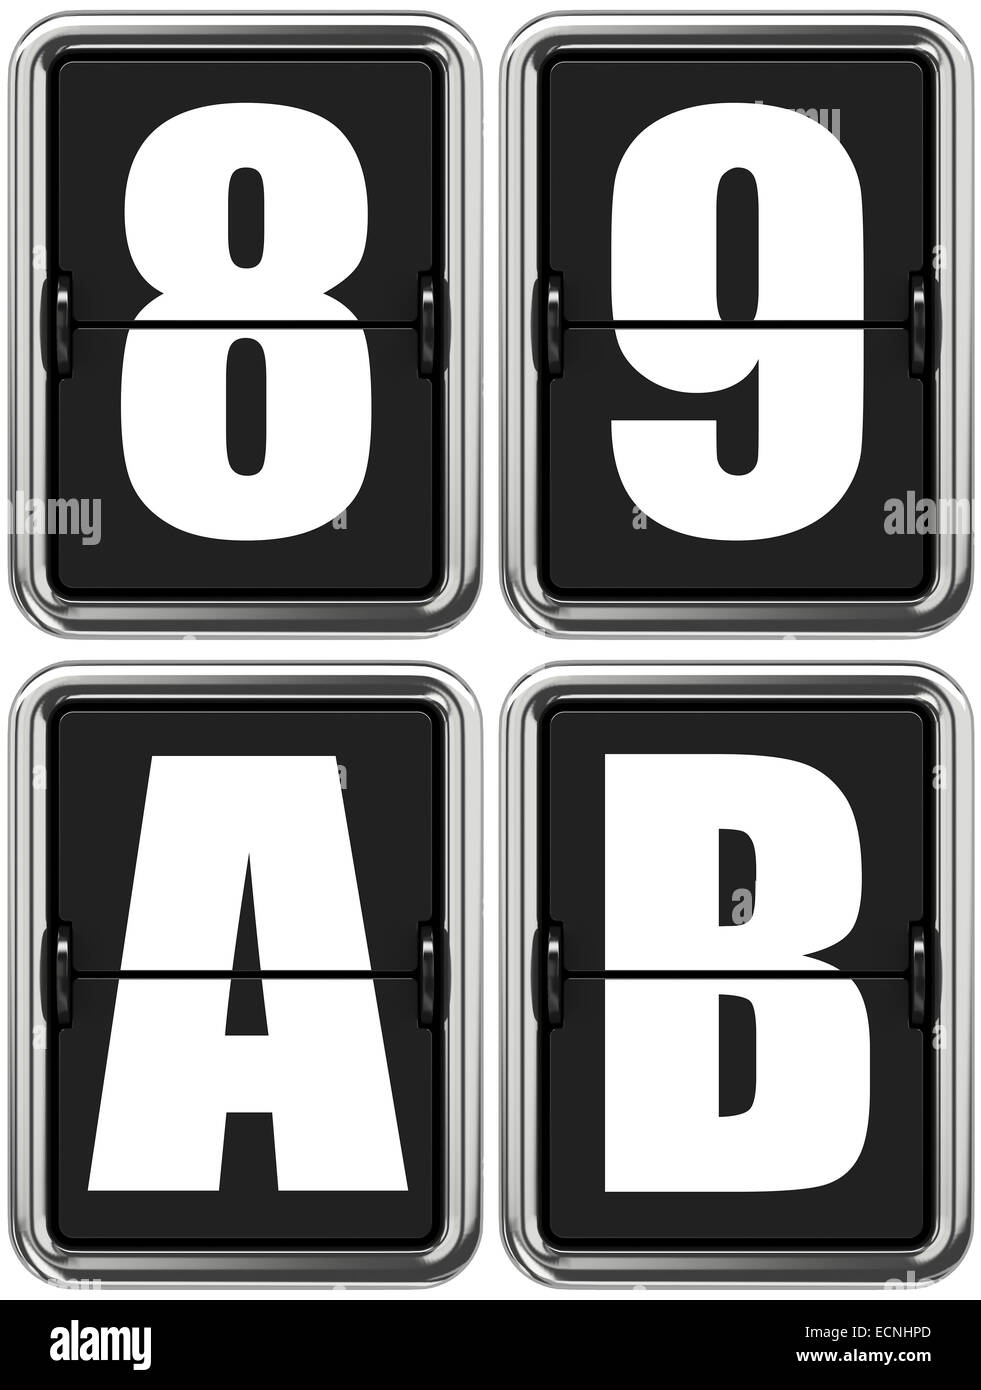 Letters A, B, and Digits 8, 9 on Mechanical Scoreboard. Stock Photo